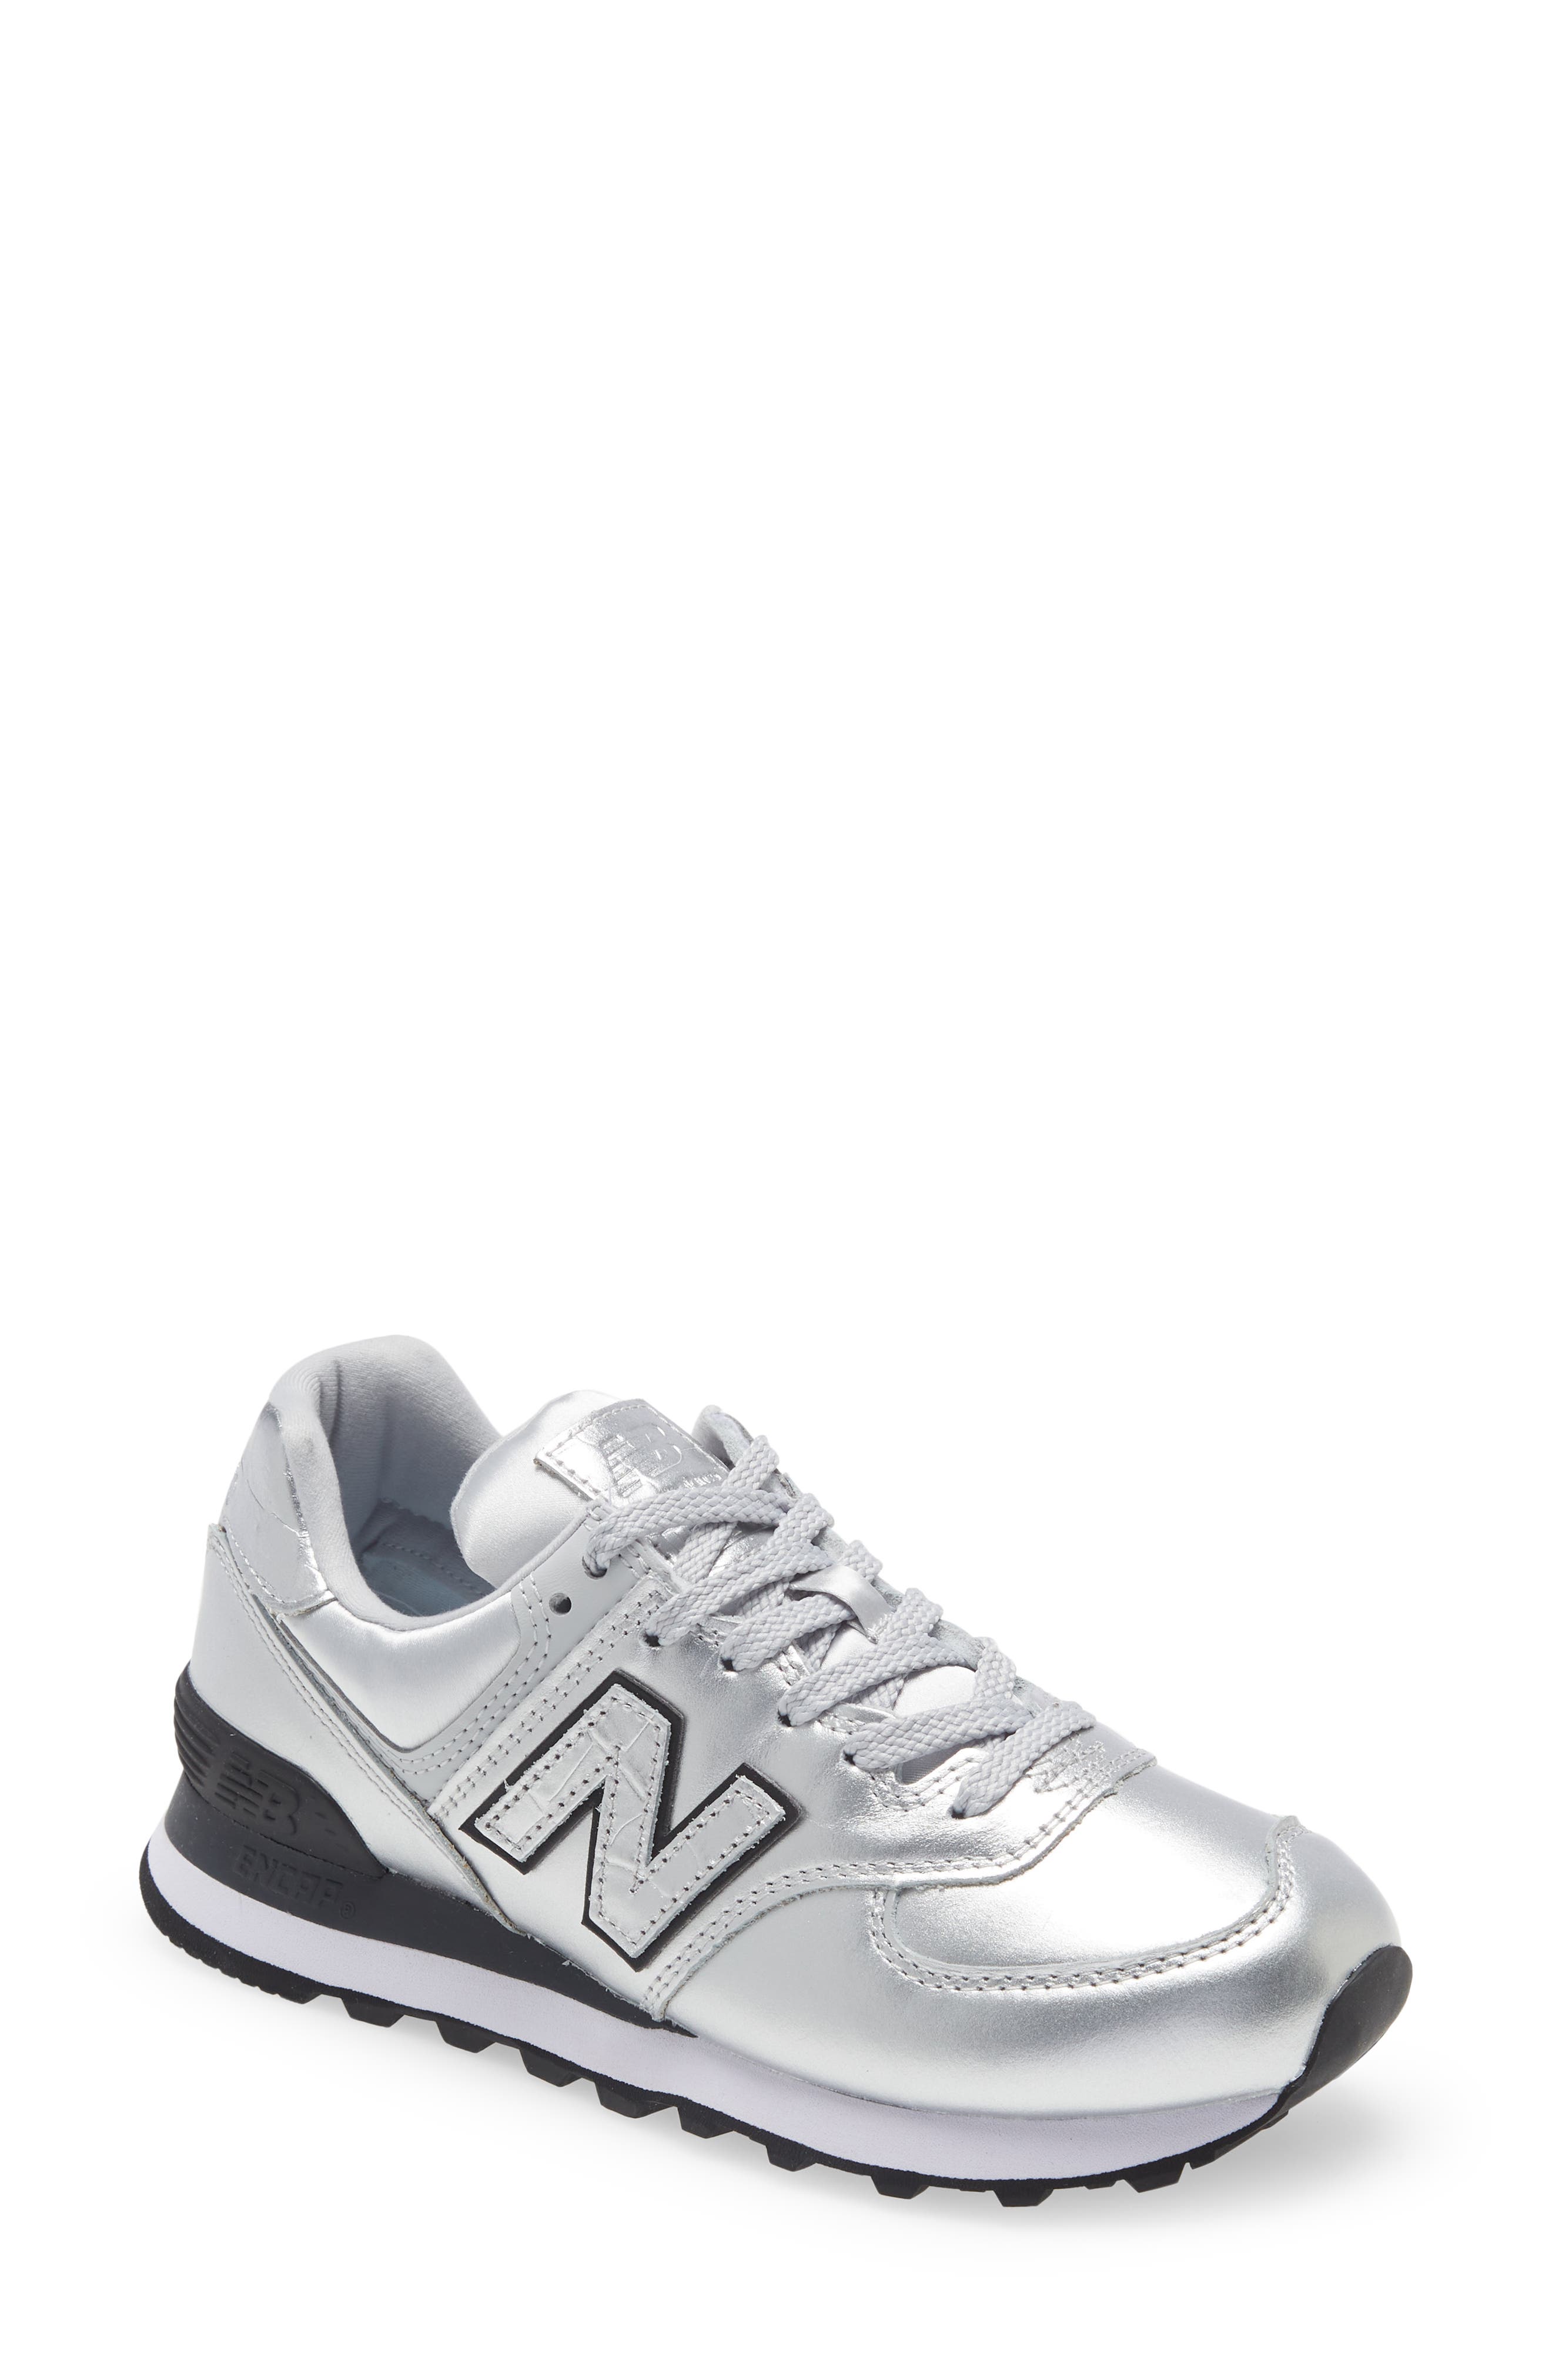 new balance 101 women's casual shoes